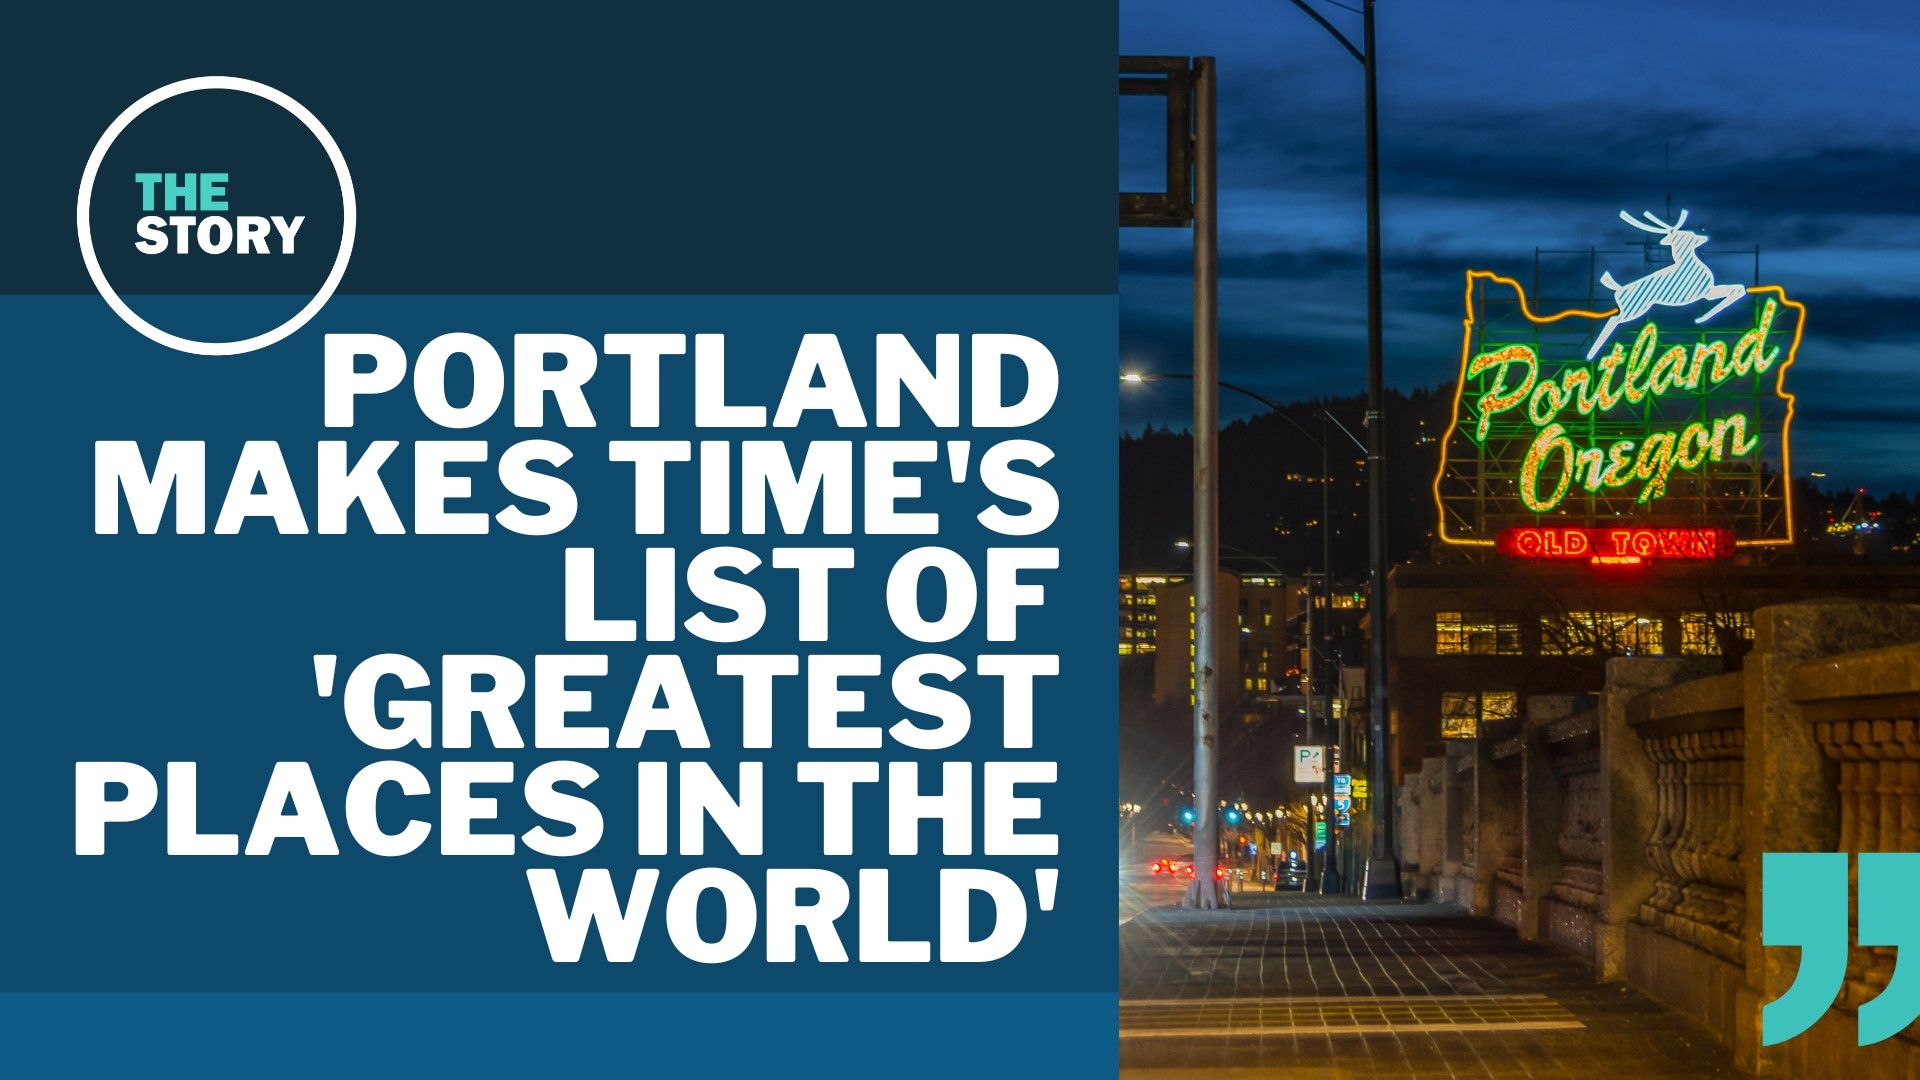 Are we talking about Portland, Oregon? We talked to the list’s author about how the Rose City ended up honored, despite its struggling reputation.